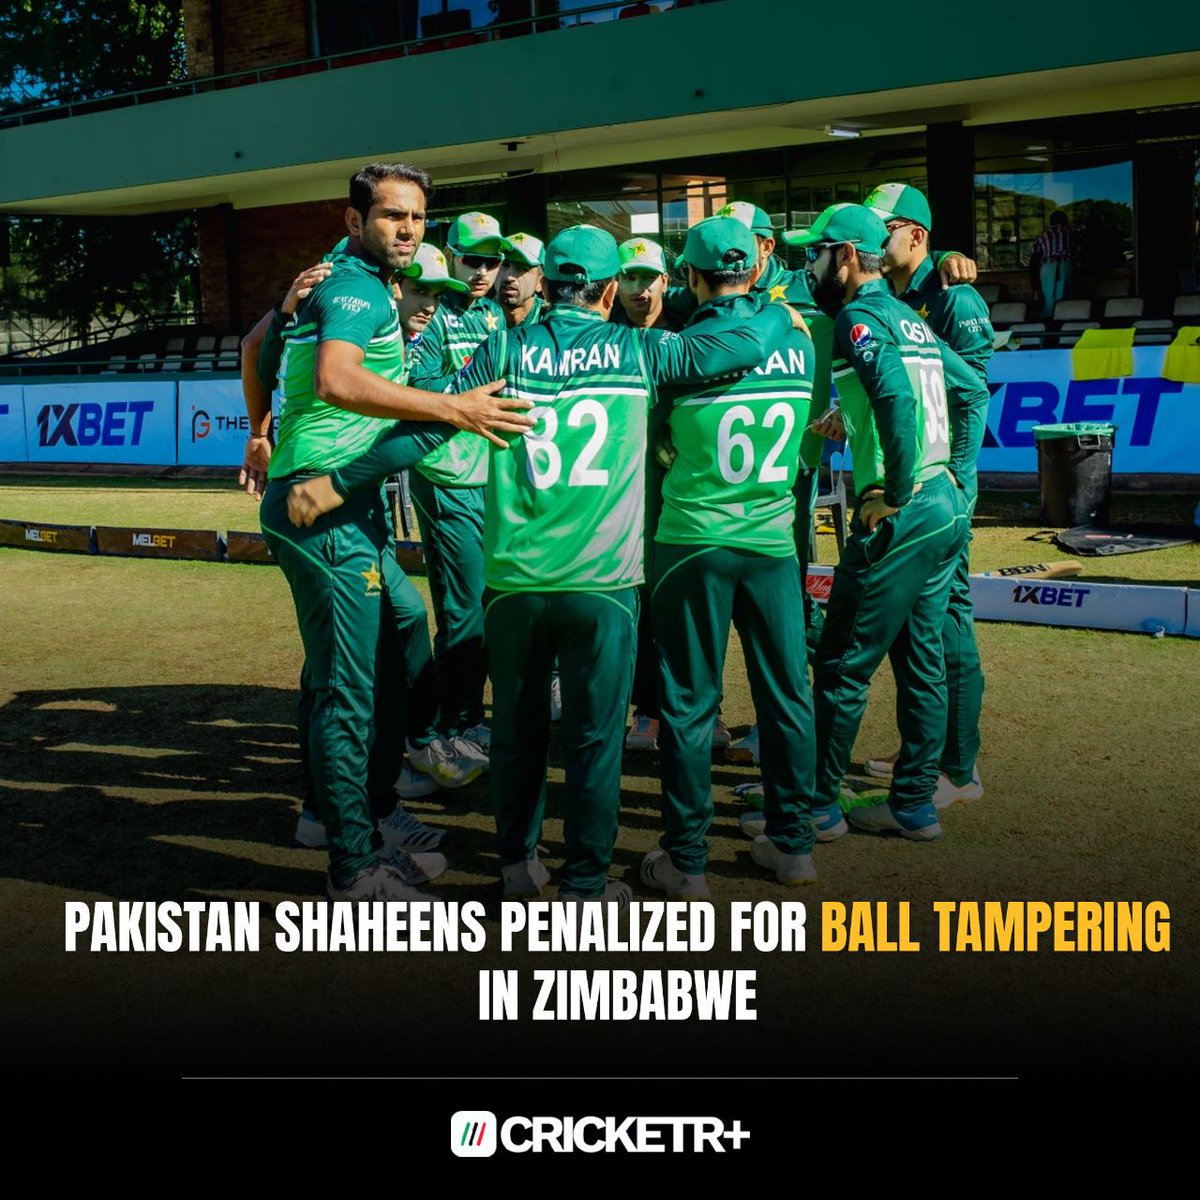 Umpire Iknow Chabi penalized Pakistan Shaheens for ball tampering in the 6th OD against Zimbabwe Select, five runs were added to the home side's total.

#ZIMvPAK